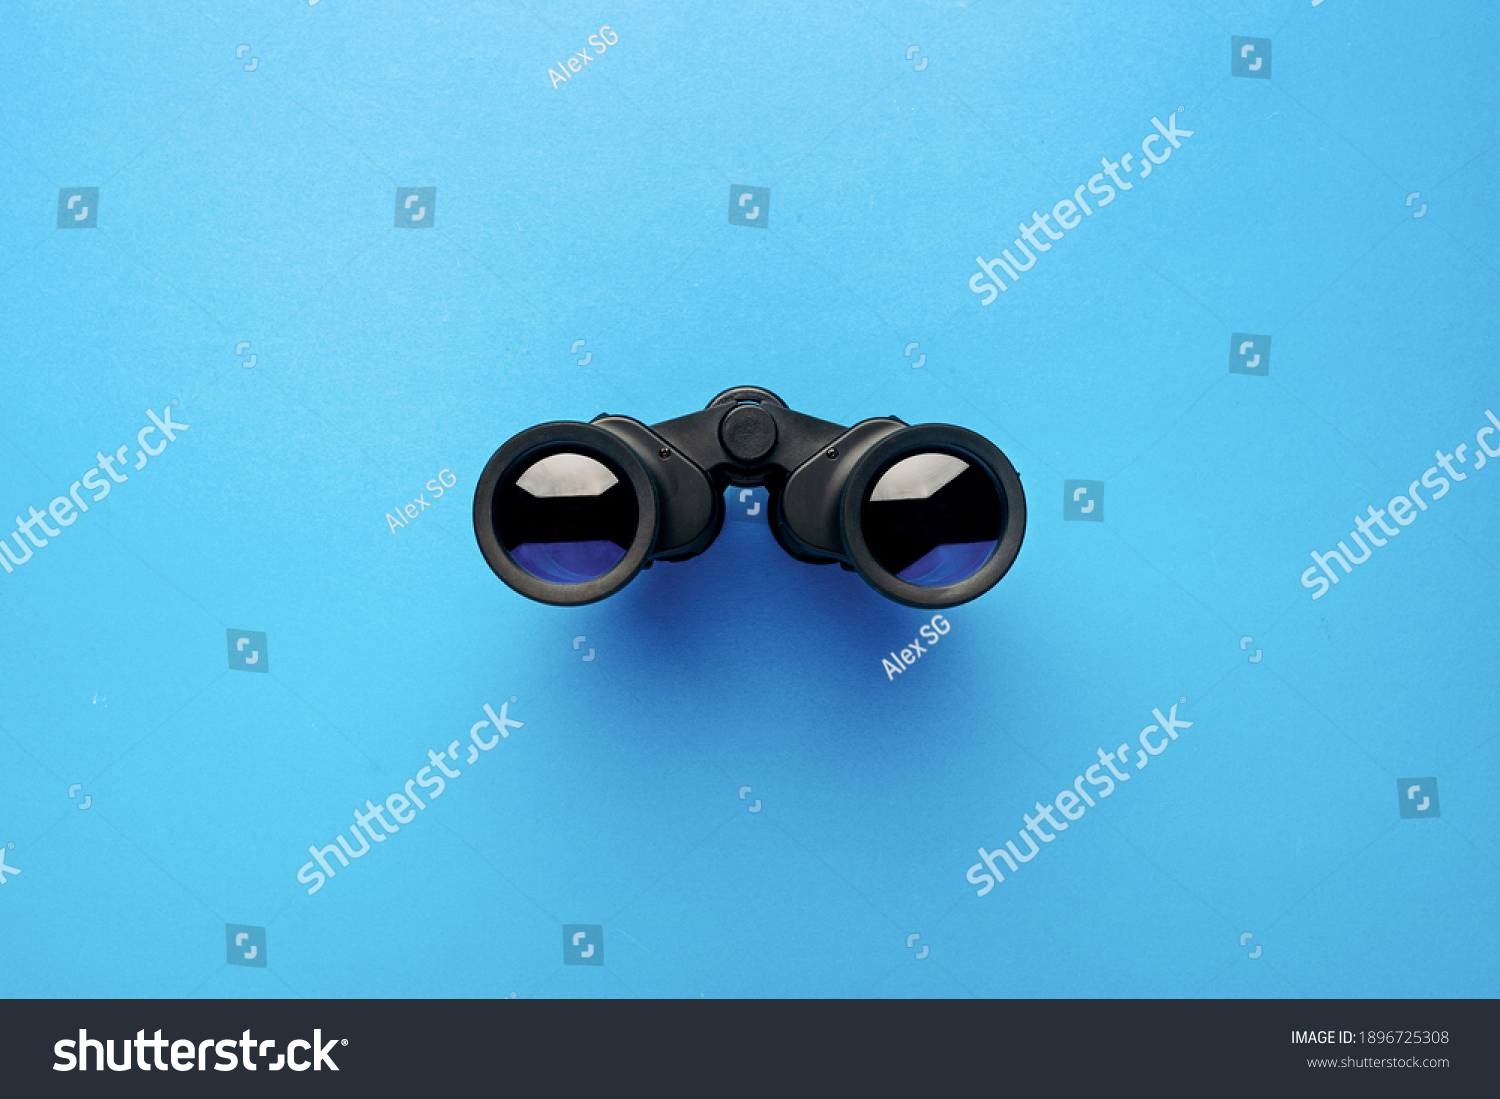 Binoculars on a light blue background. Banner. Flat lay, top view. #1896725308